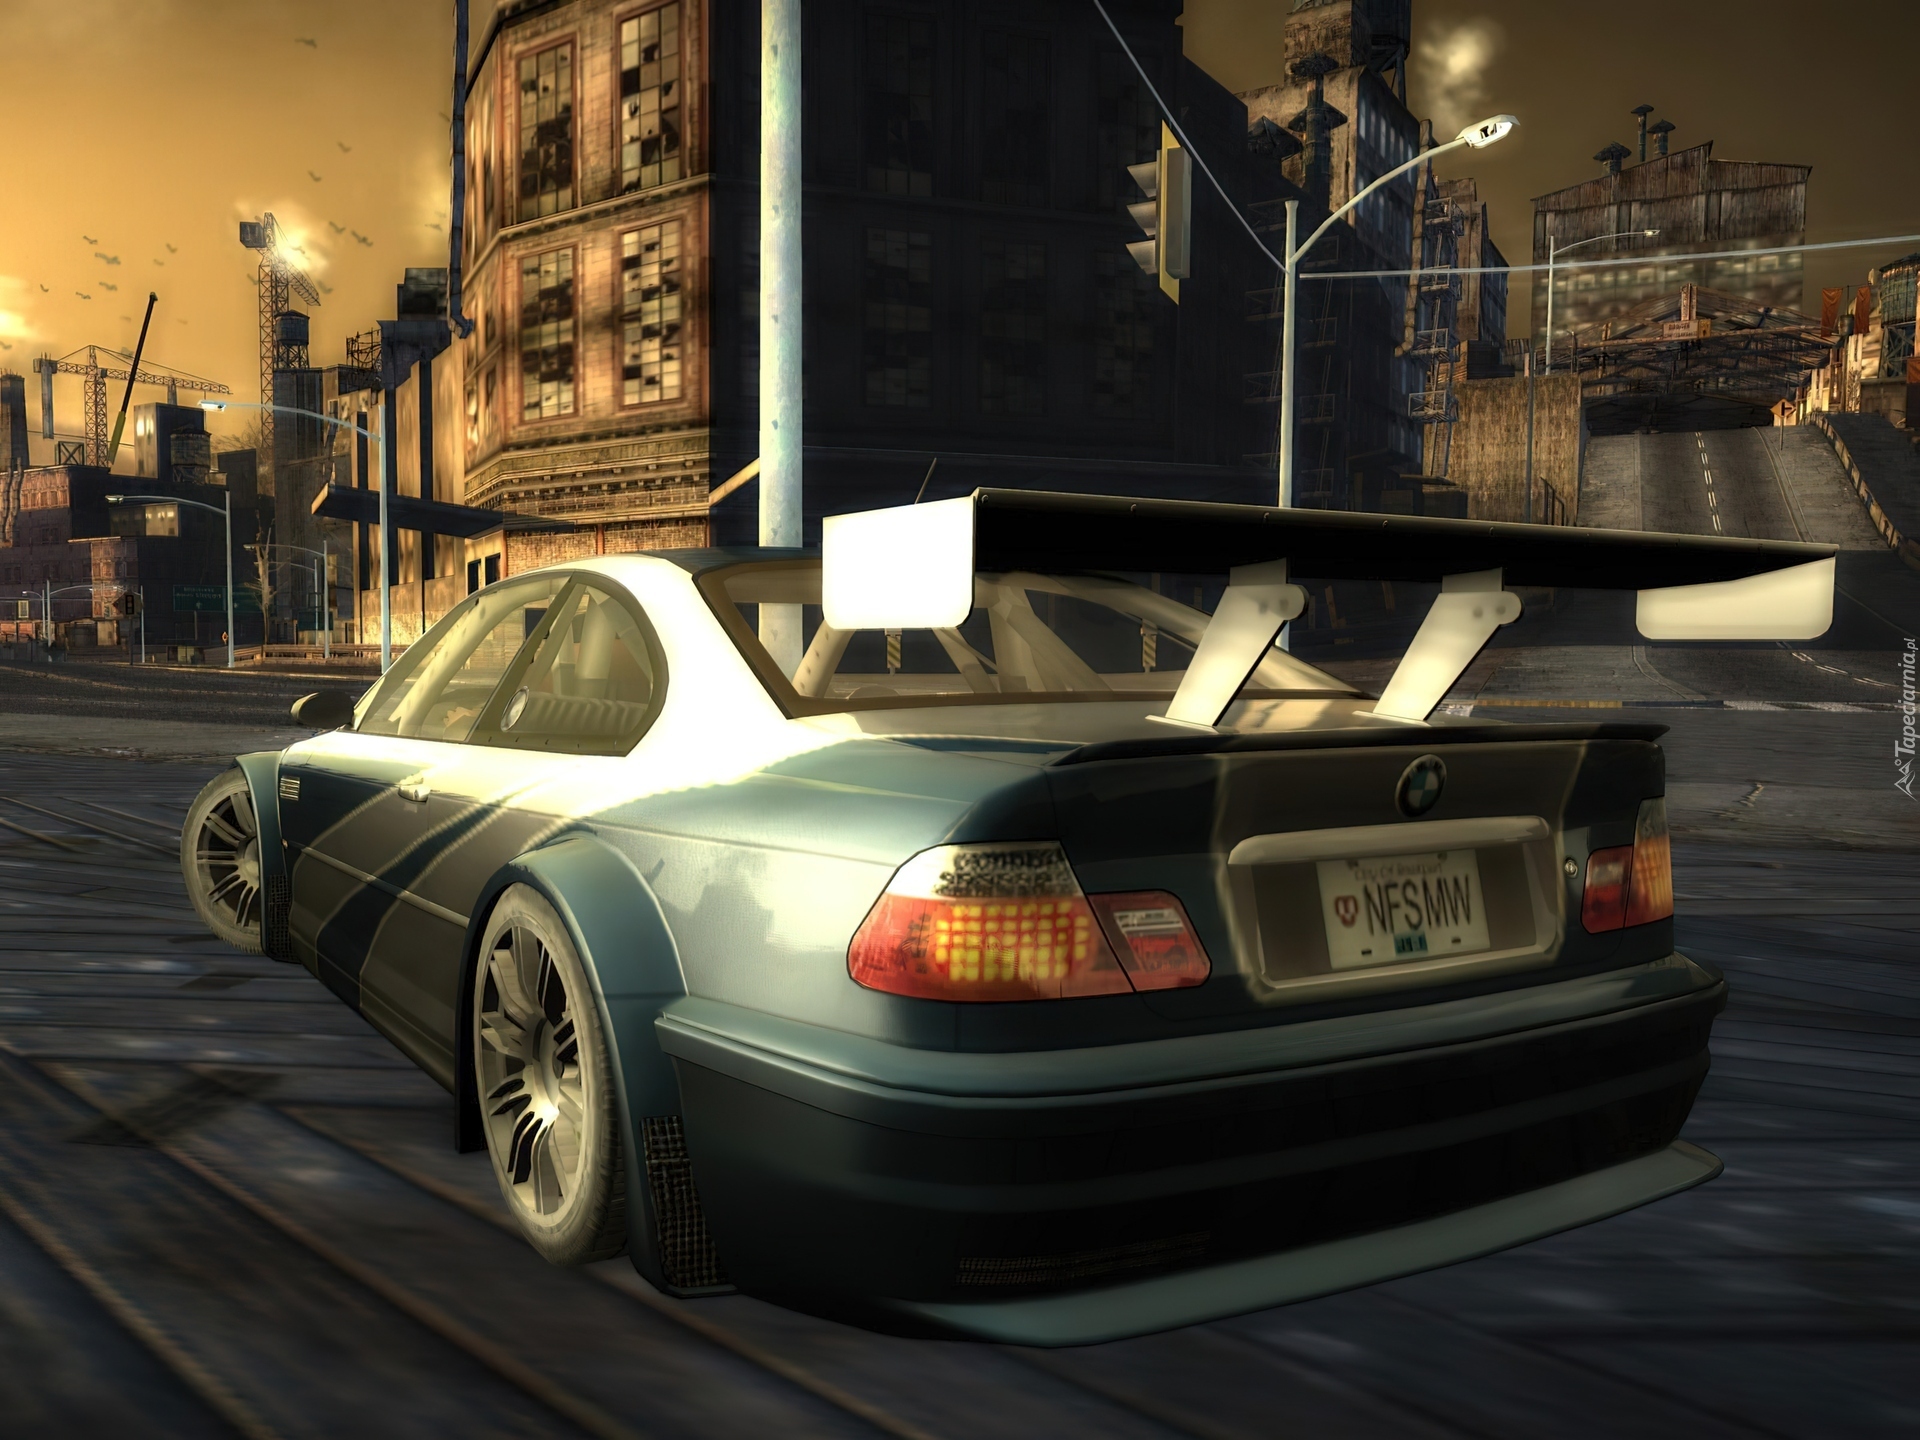 Most wanted hq. BMW m3 GTR NFS MW. Need for Speed most wanted 2005. NFS most wanted 2005 мост. Недфорспид most wanted 2005.